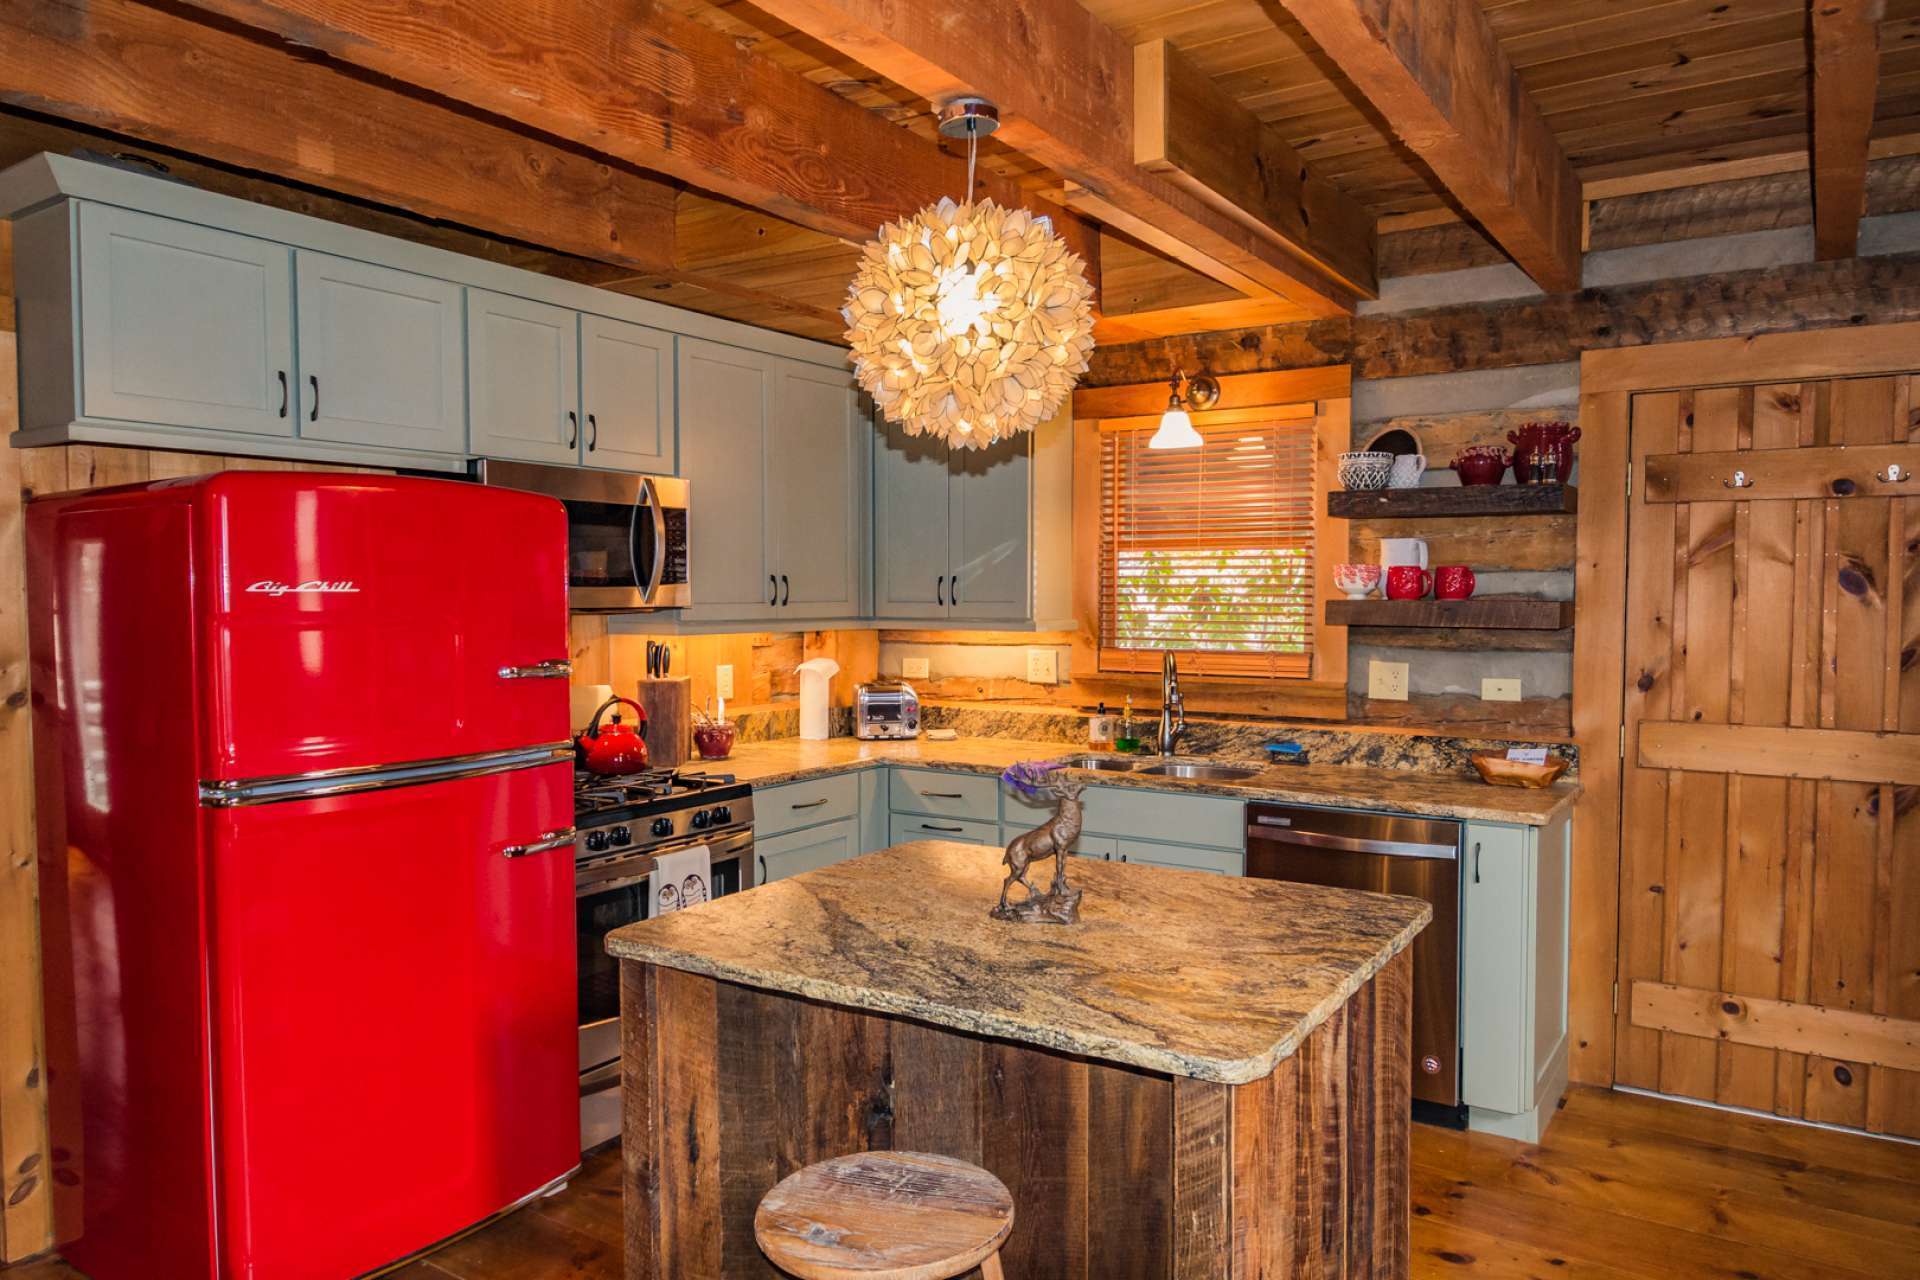 The new-fashioned kitchen features custom cabinets, a barn-wood island with leather granite tops, new stainless appliances with a gas range and a "Big Chill" refrigerator. This home exudes both charm and character.